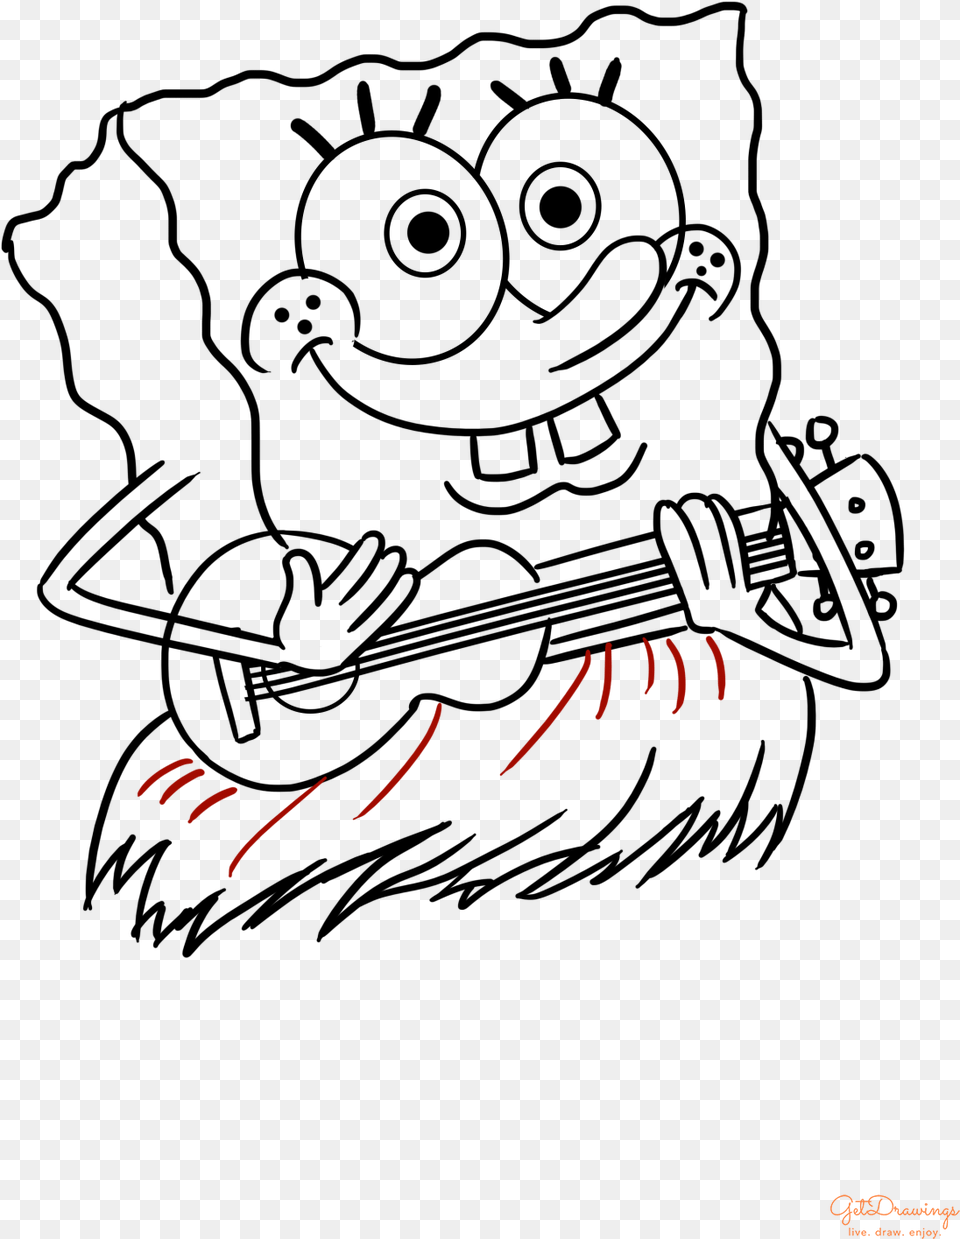 How To Draw A Spongebob Squarepants Drawing, Fireworks, Nature, Night, Outdoors Png Image